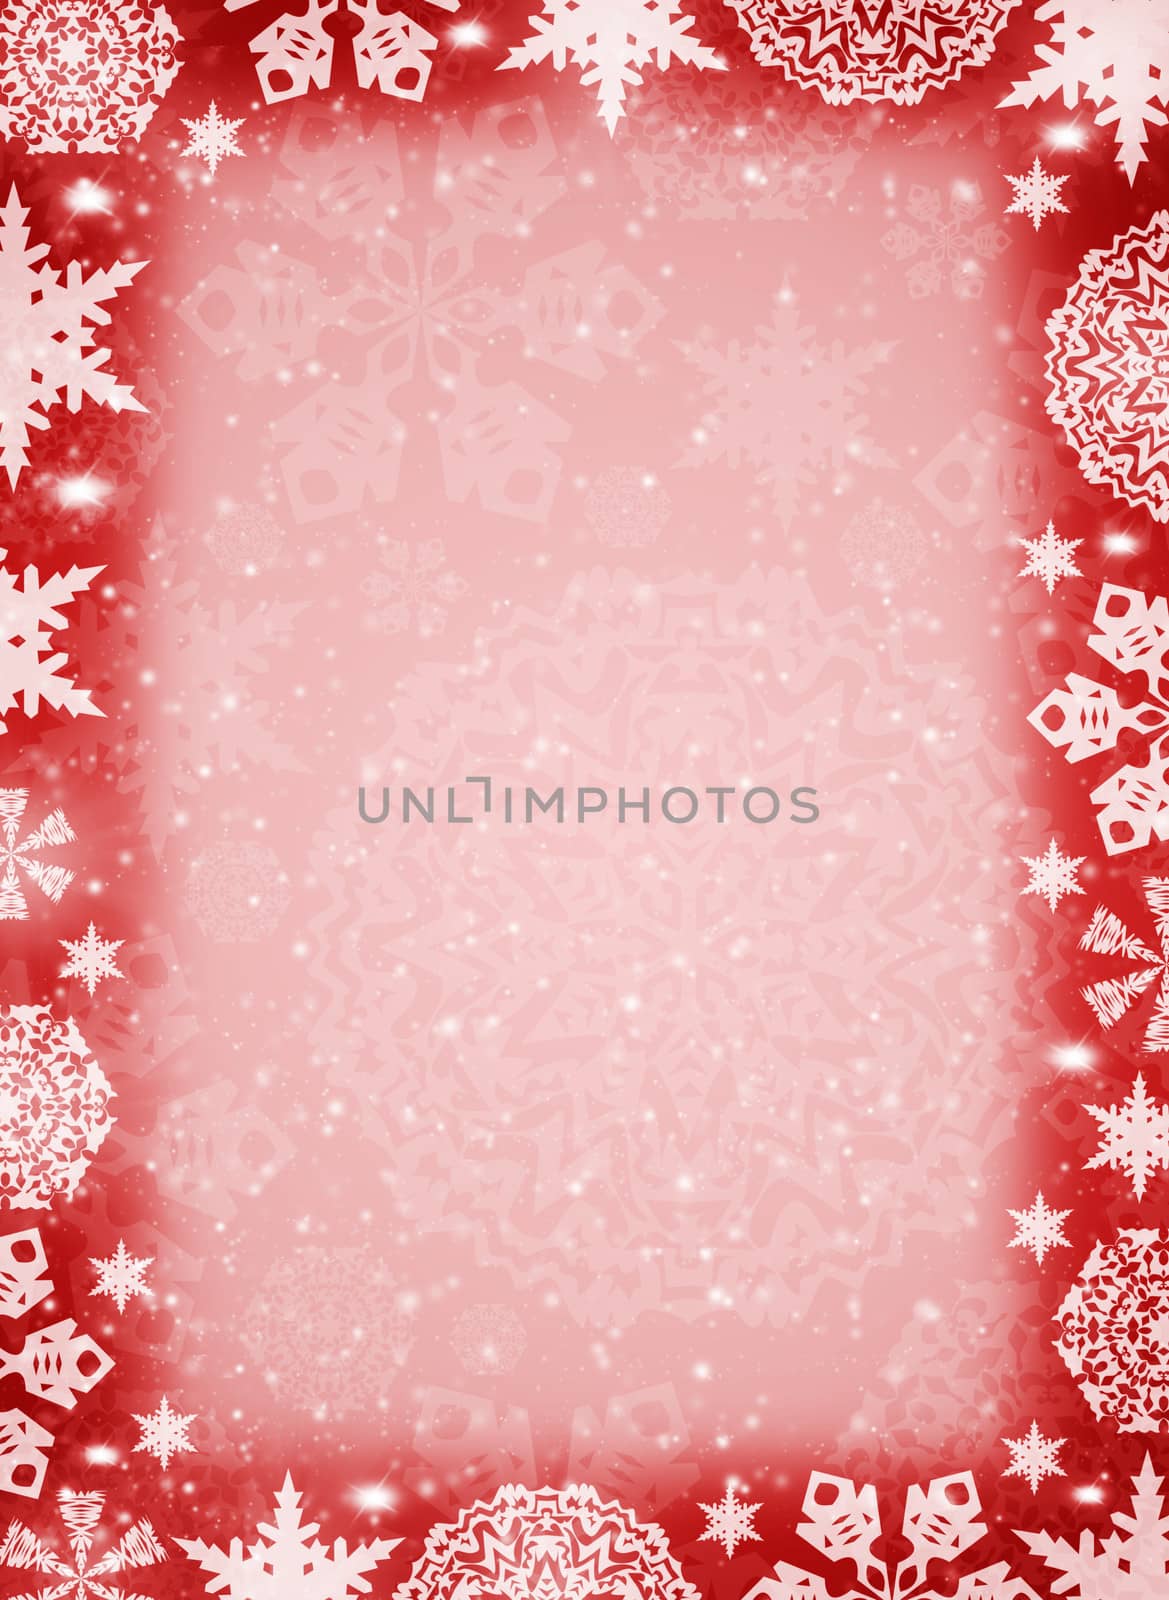 Christmas frame. White snowflakes on the red background